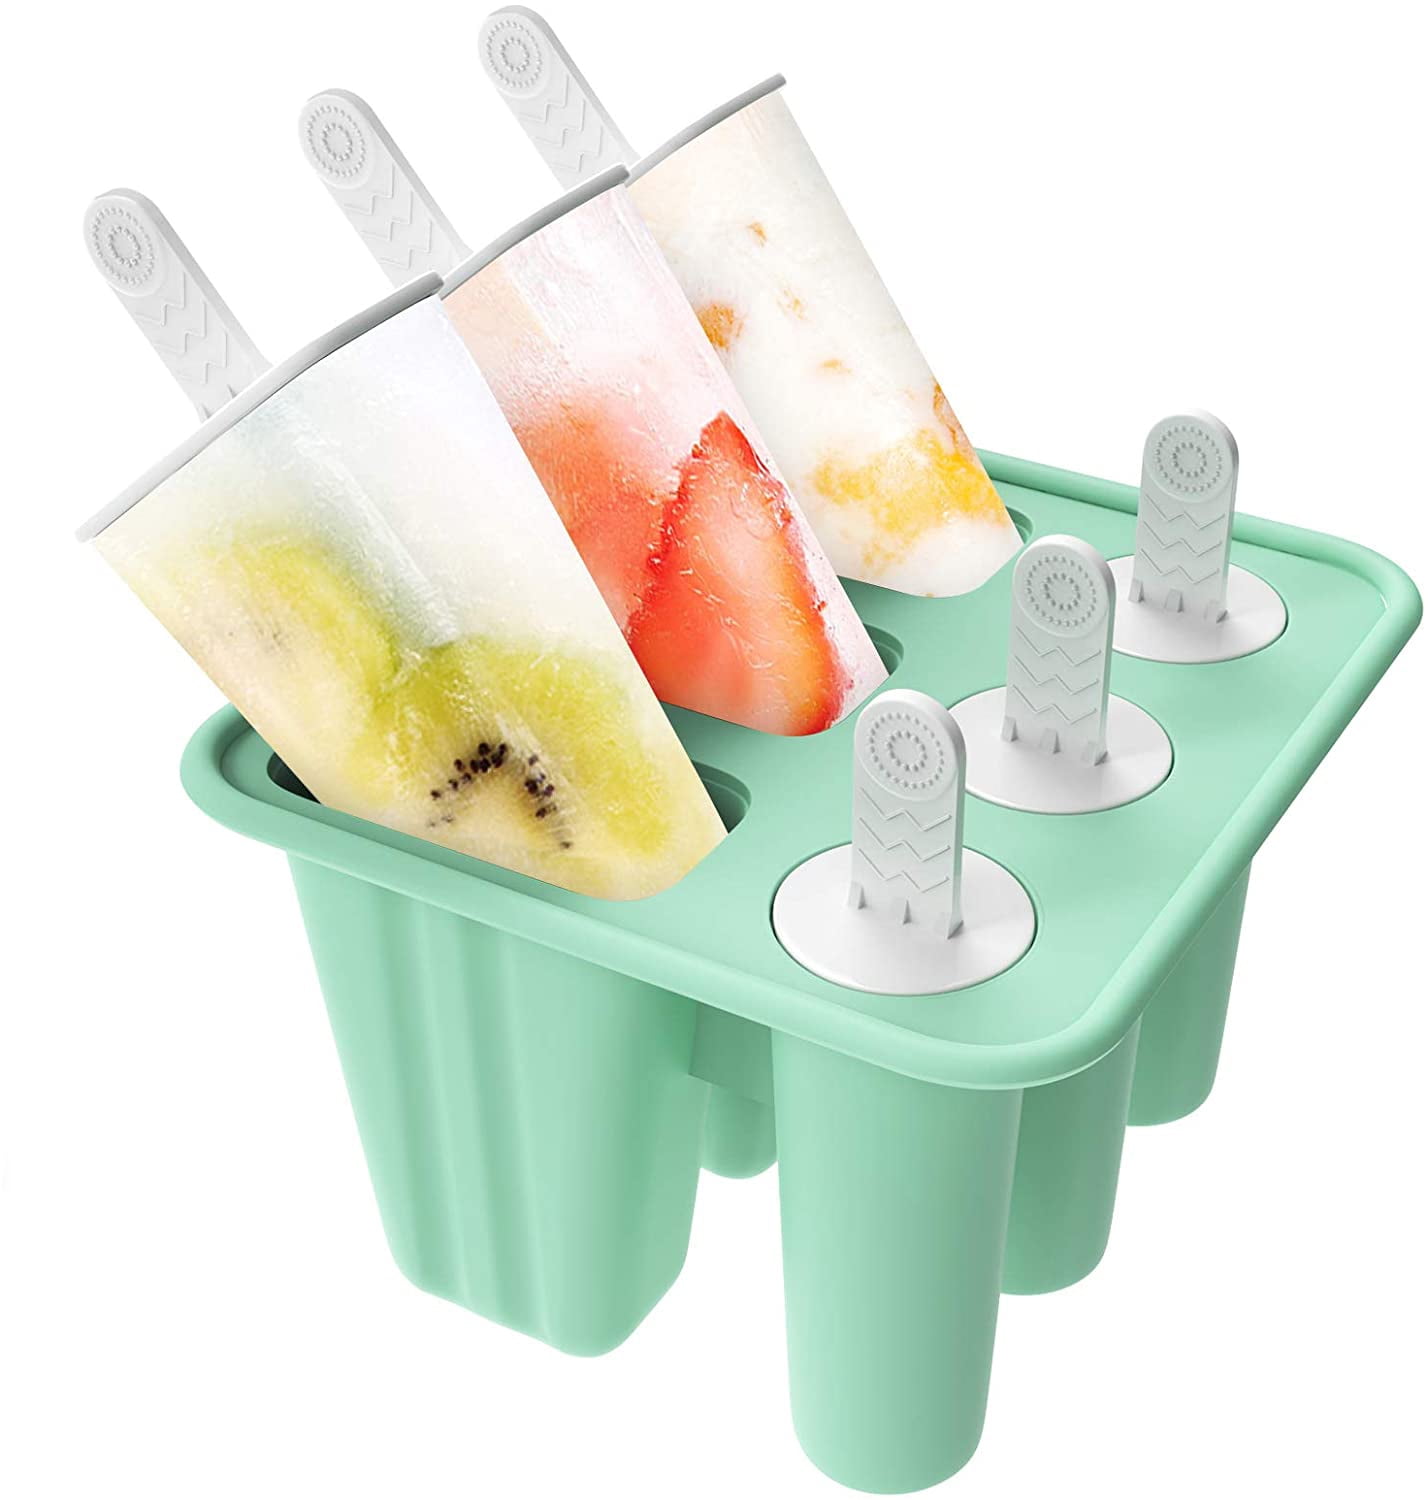 Reusable Easy Release Popsicle Mold with Silicone Funnel and Cleaning Brush Silicone Popsicle Molds Blue BPA Free 6 Cavities Ice Pop Molds for Kids 